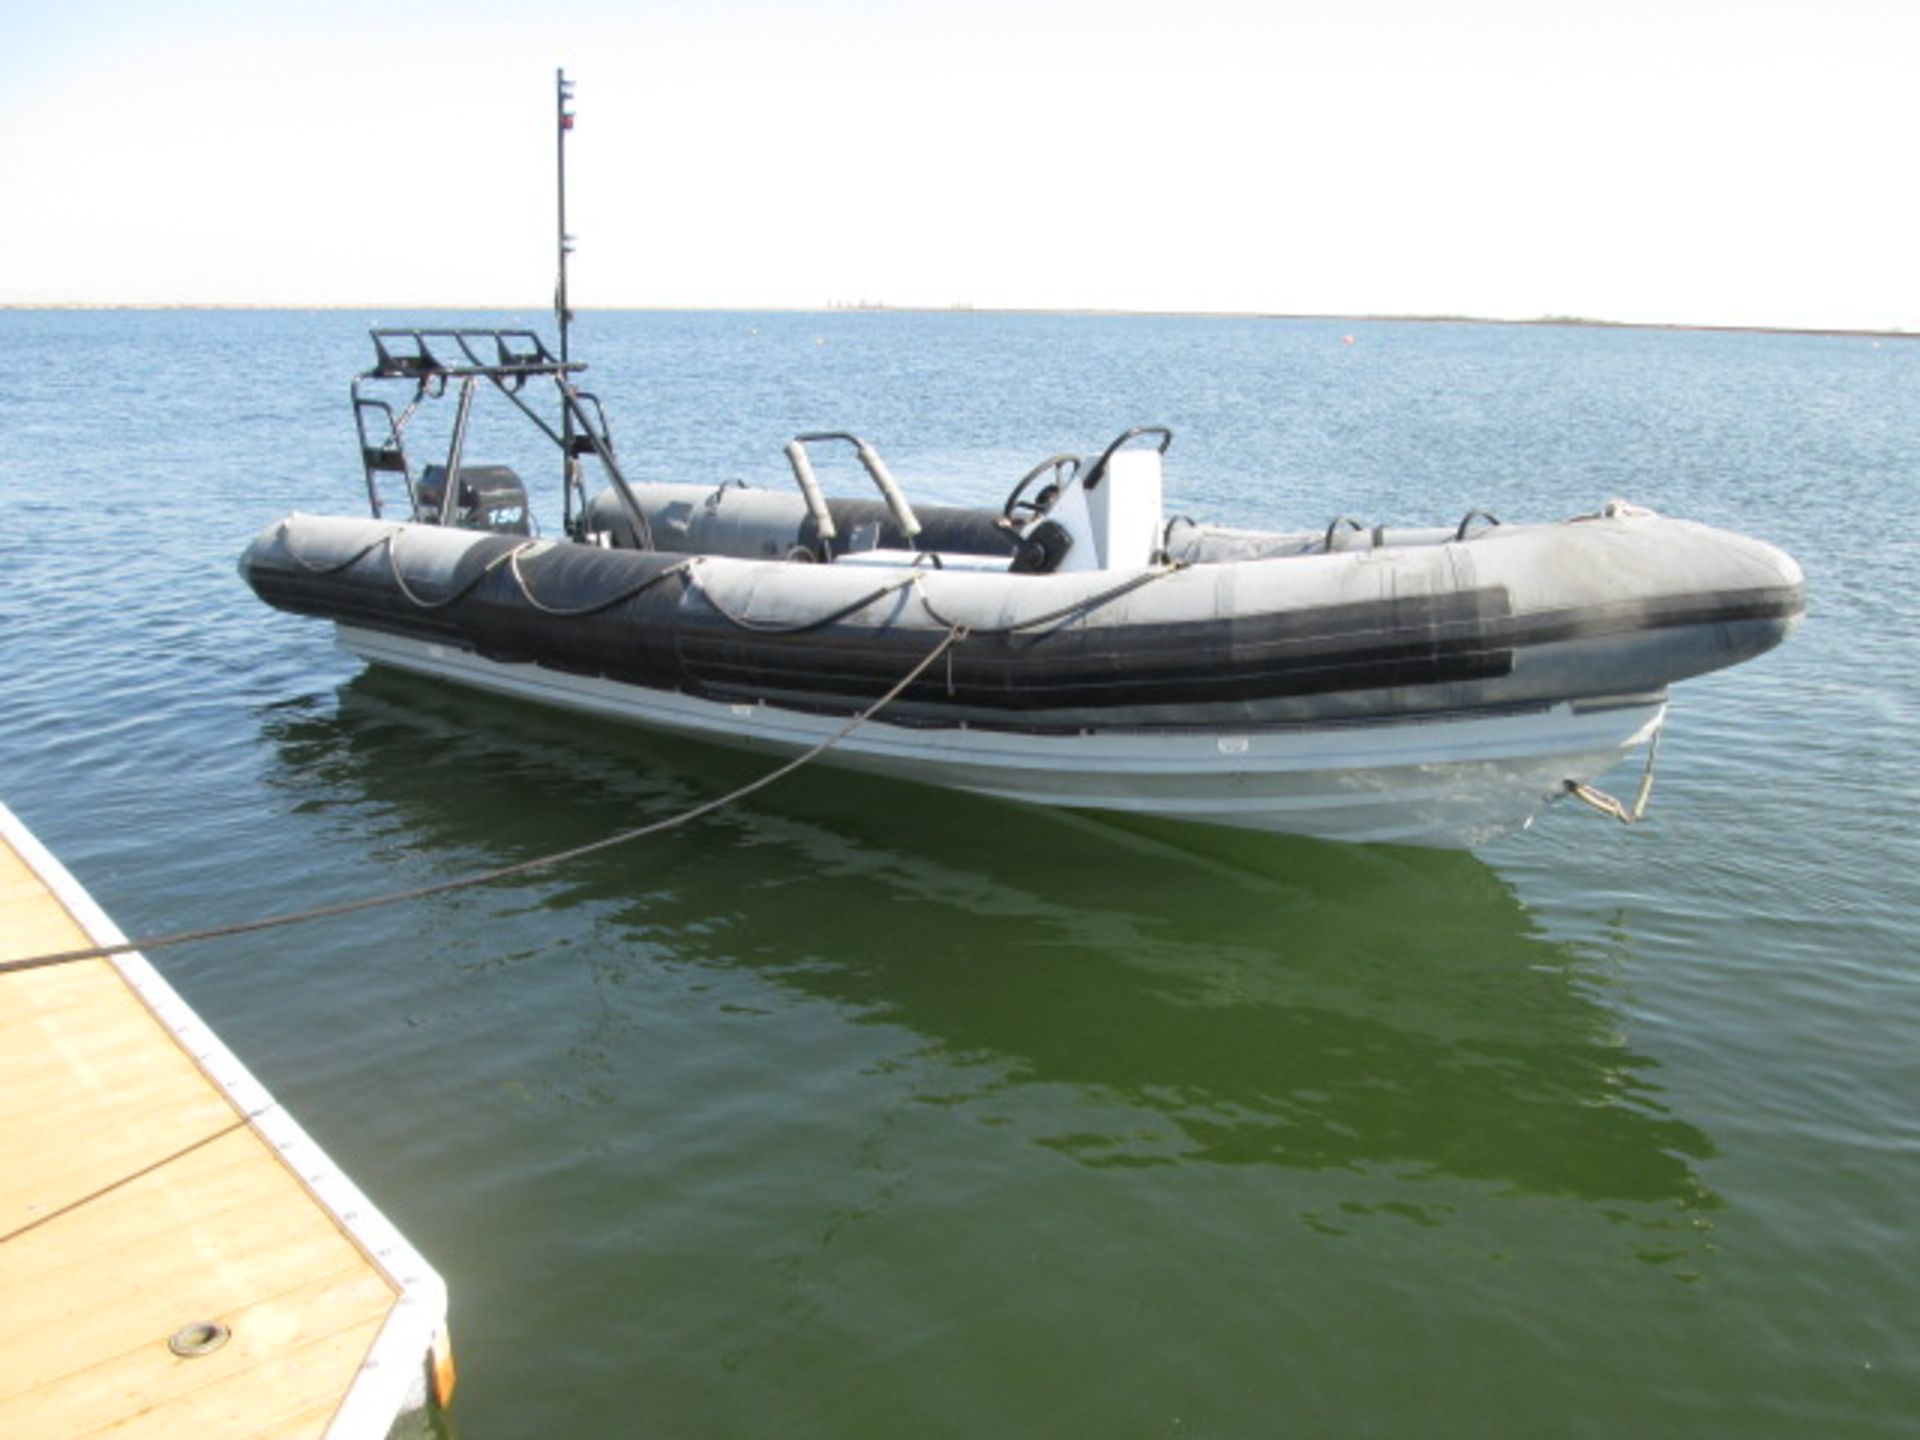 Halmatic 22 Military Spec RIB Boat - Mercury 6 cylinder 2 stroke 150hp outboard - Length 7 - Image 12 of 36